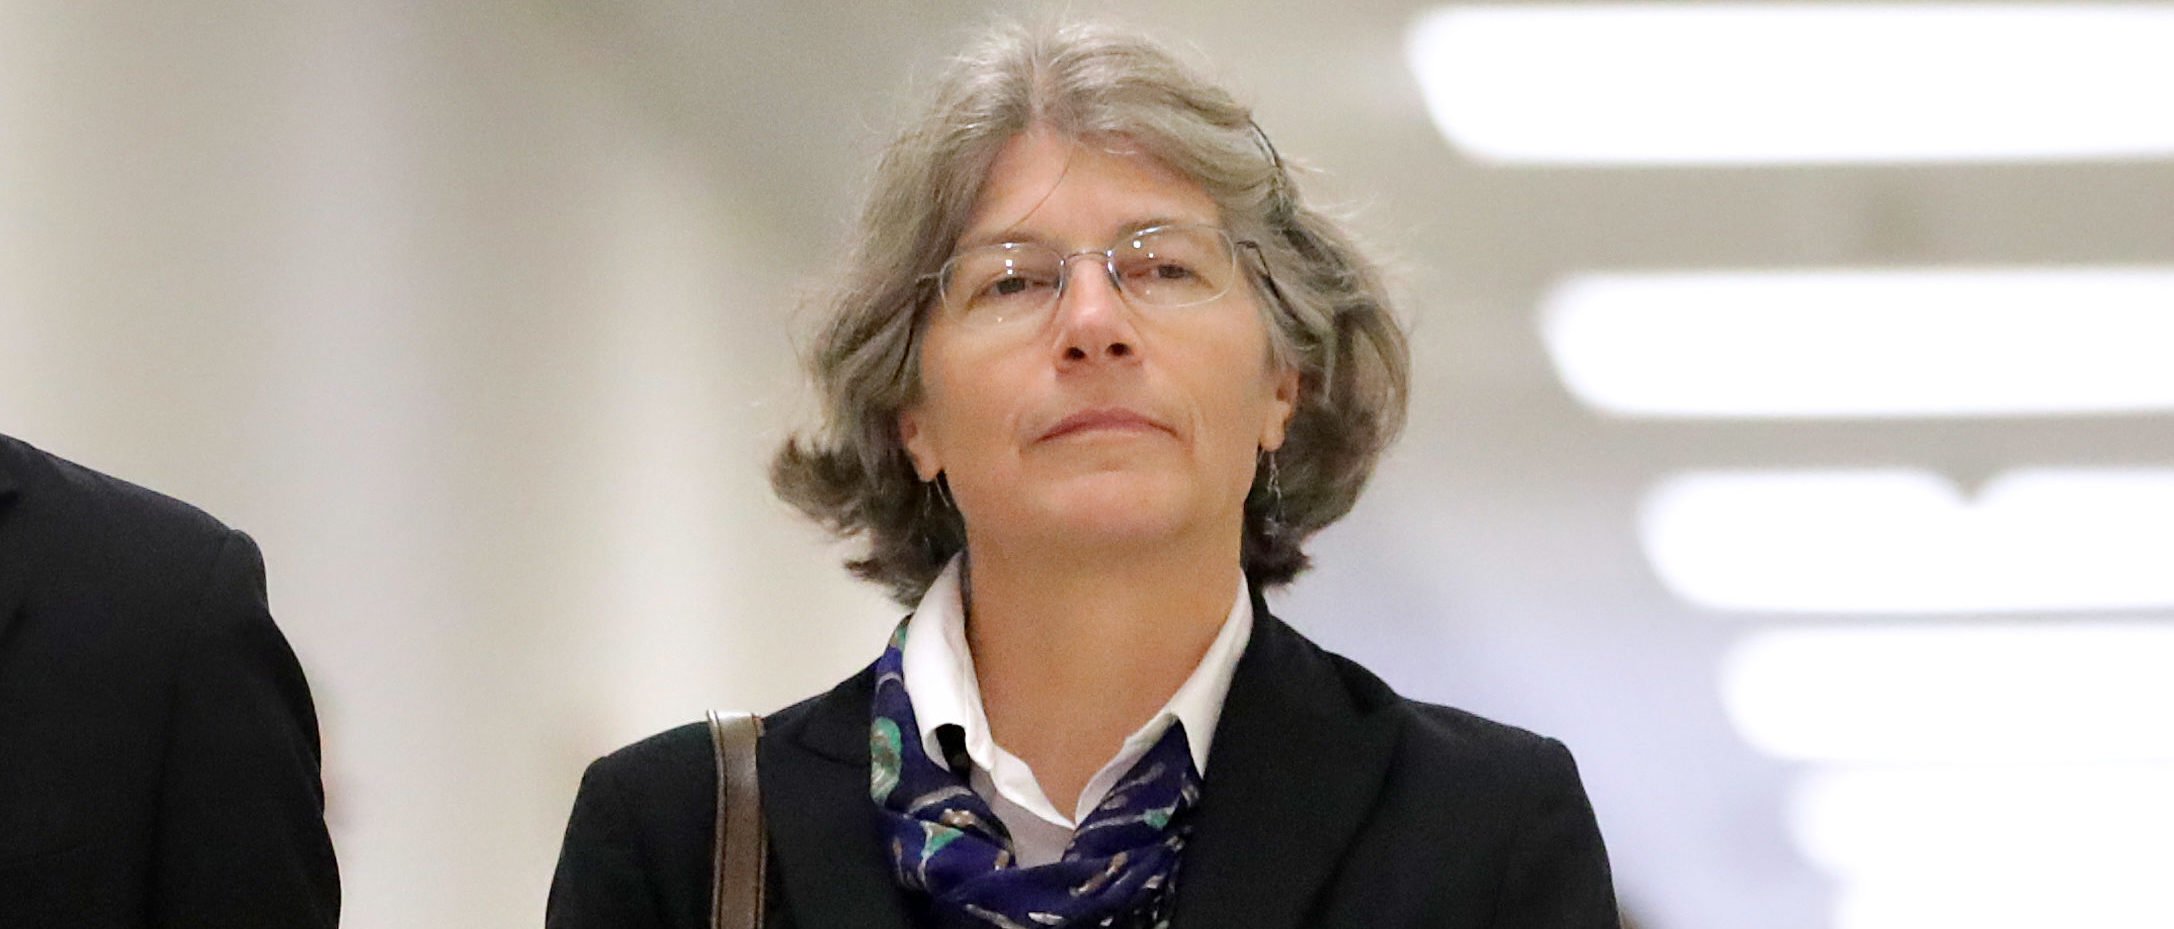 WASHINGTON, DC - OCTOBER 19: Fusion GPS contractor Nellie Ohr arrives for a closed-door interview with investigators from the House Judiciary and Oversight committees in the Rayburn House Office Building on Capitol Hill October 19, 2018 in Washington, DC. Ohr, wife of senior Justice Department official Bruce Ohr, is being investigated about the opposition research dossier about then-candidate Donald Trump’s alleged personal and business ties to Russia that Republicans say is at the center of alleged Department of Justice misconduct during the 2016 election. (Photo by Chip Somodevilla/Getty Images)